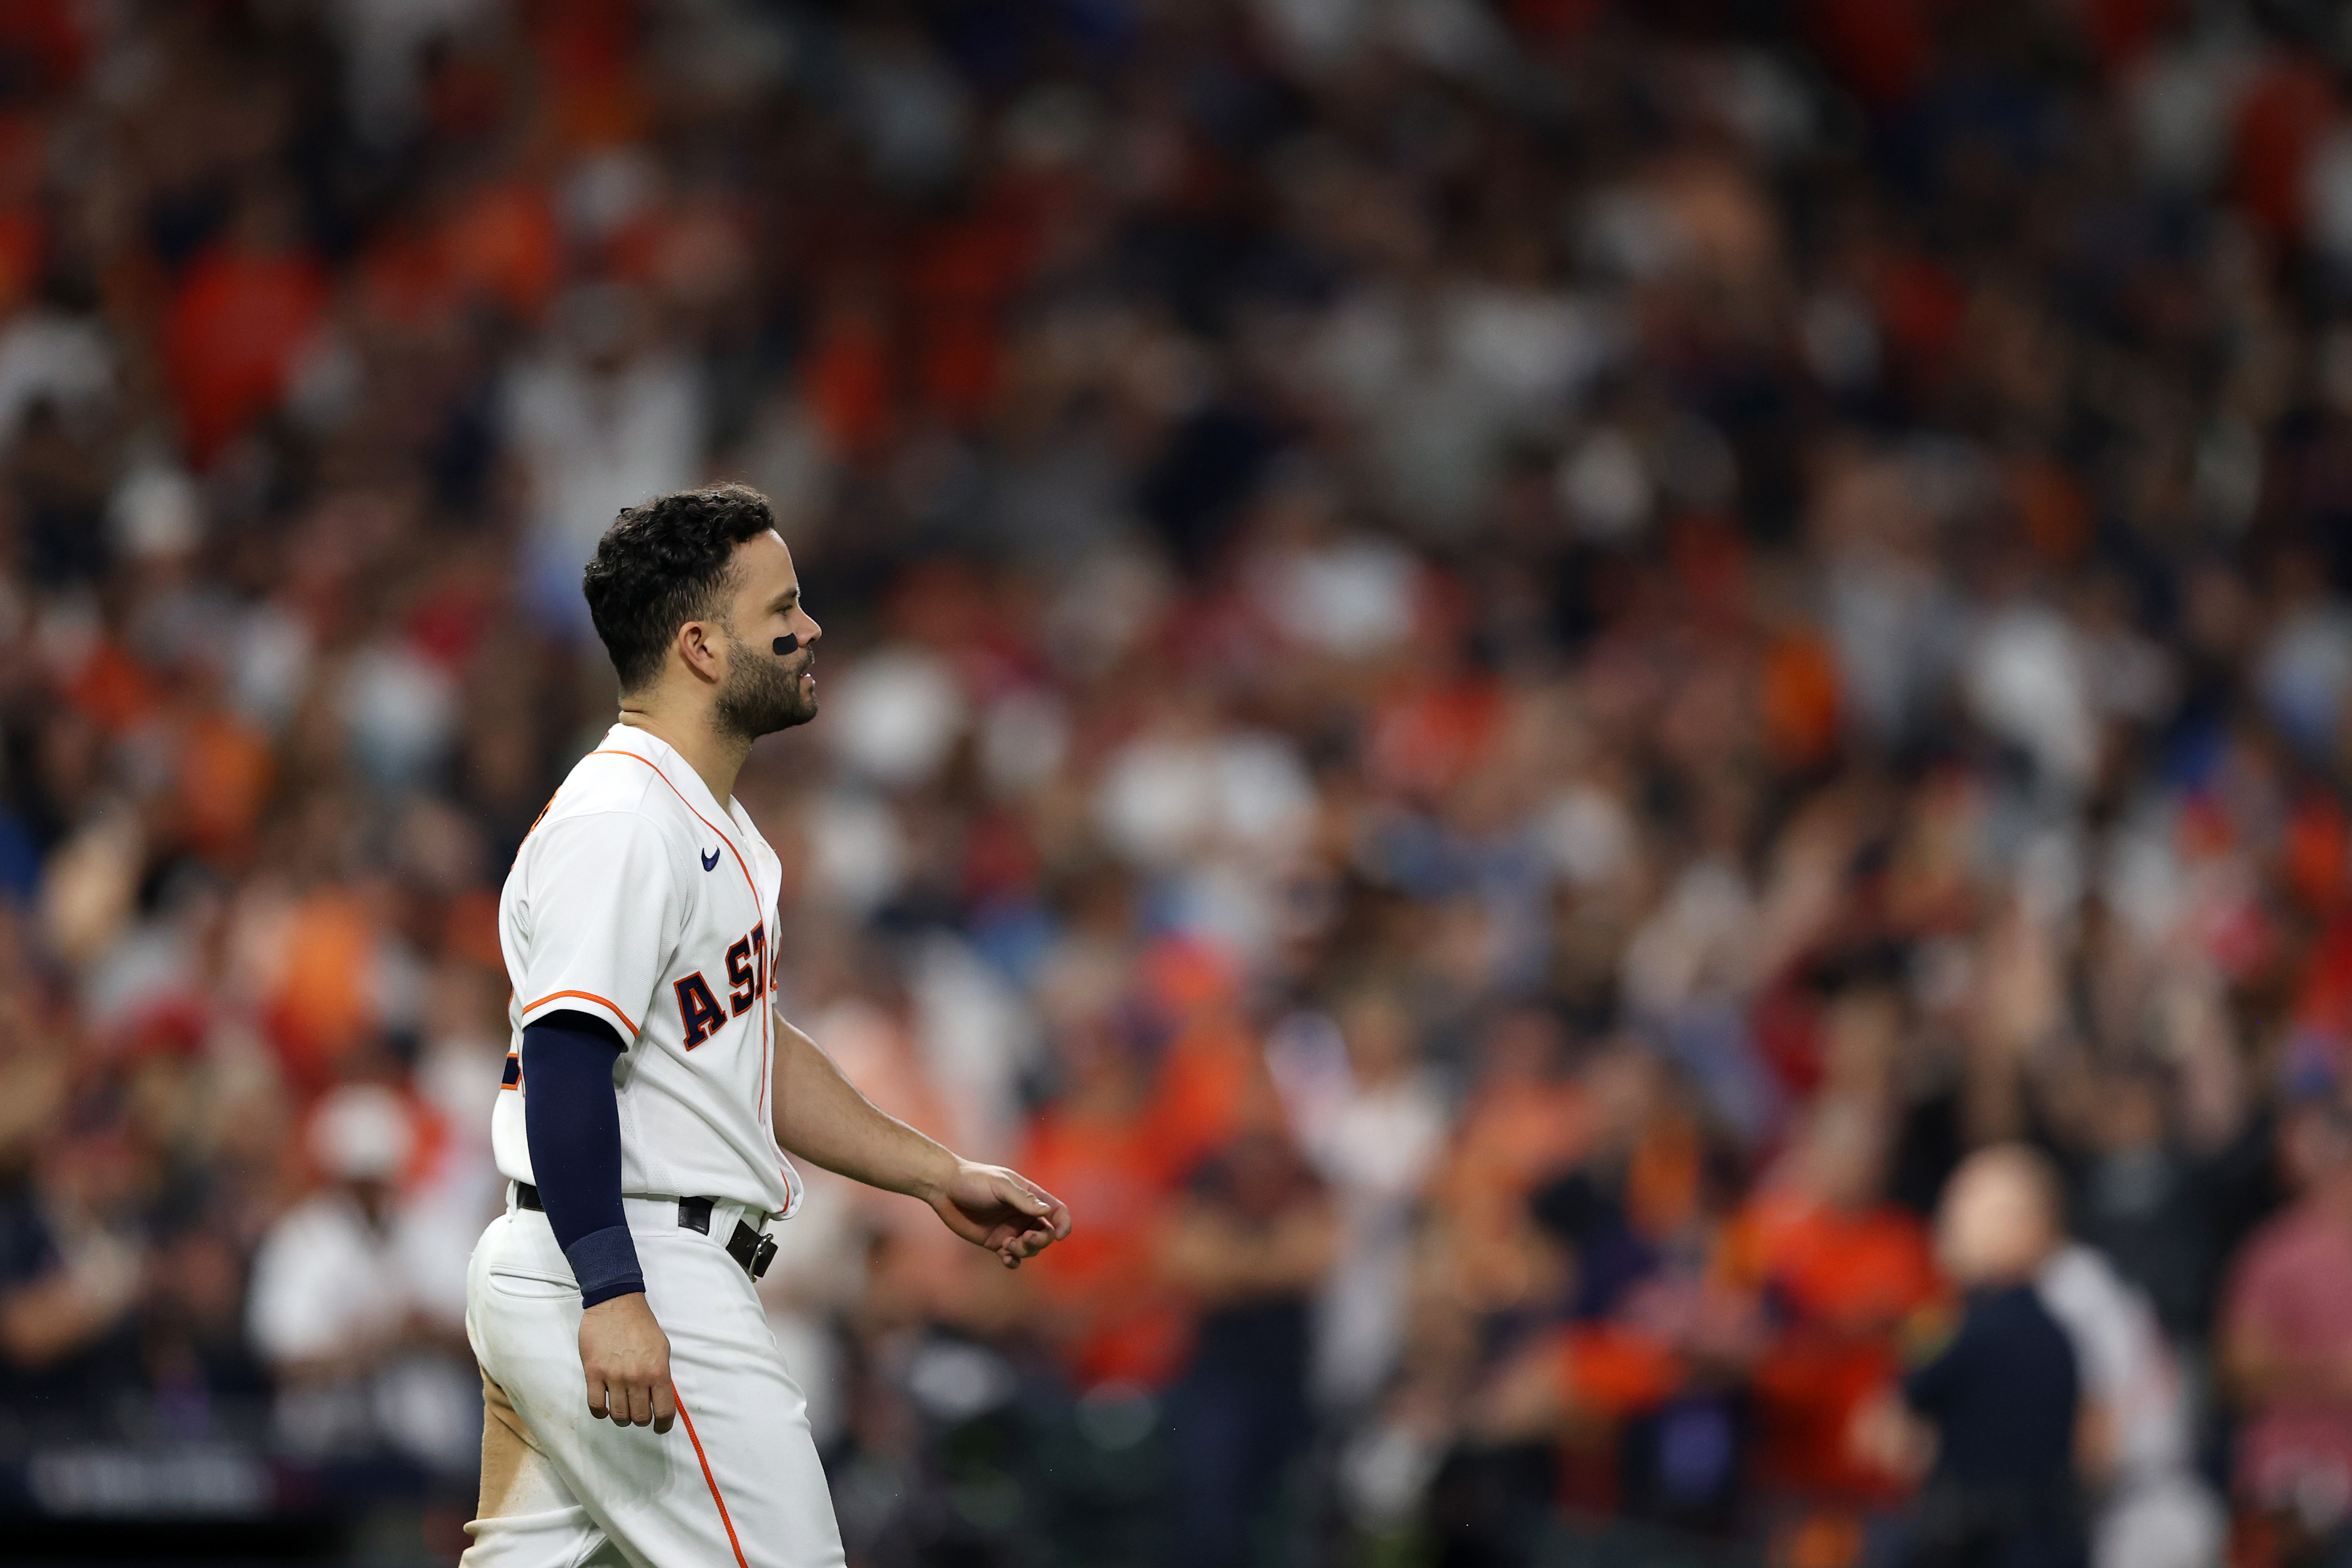 After another World Series loss, the Astros' lone championship